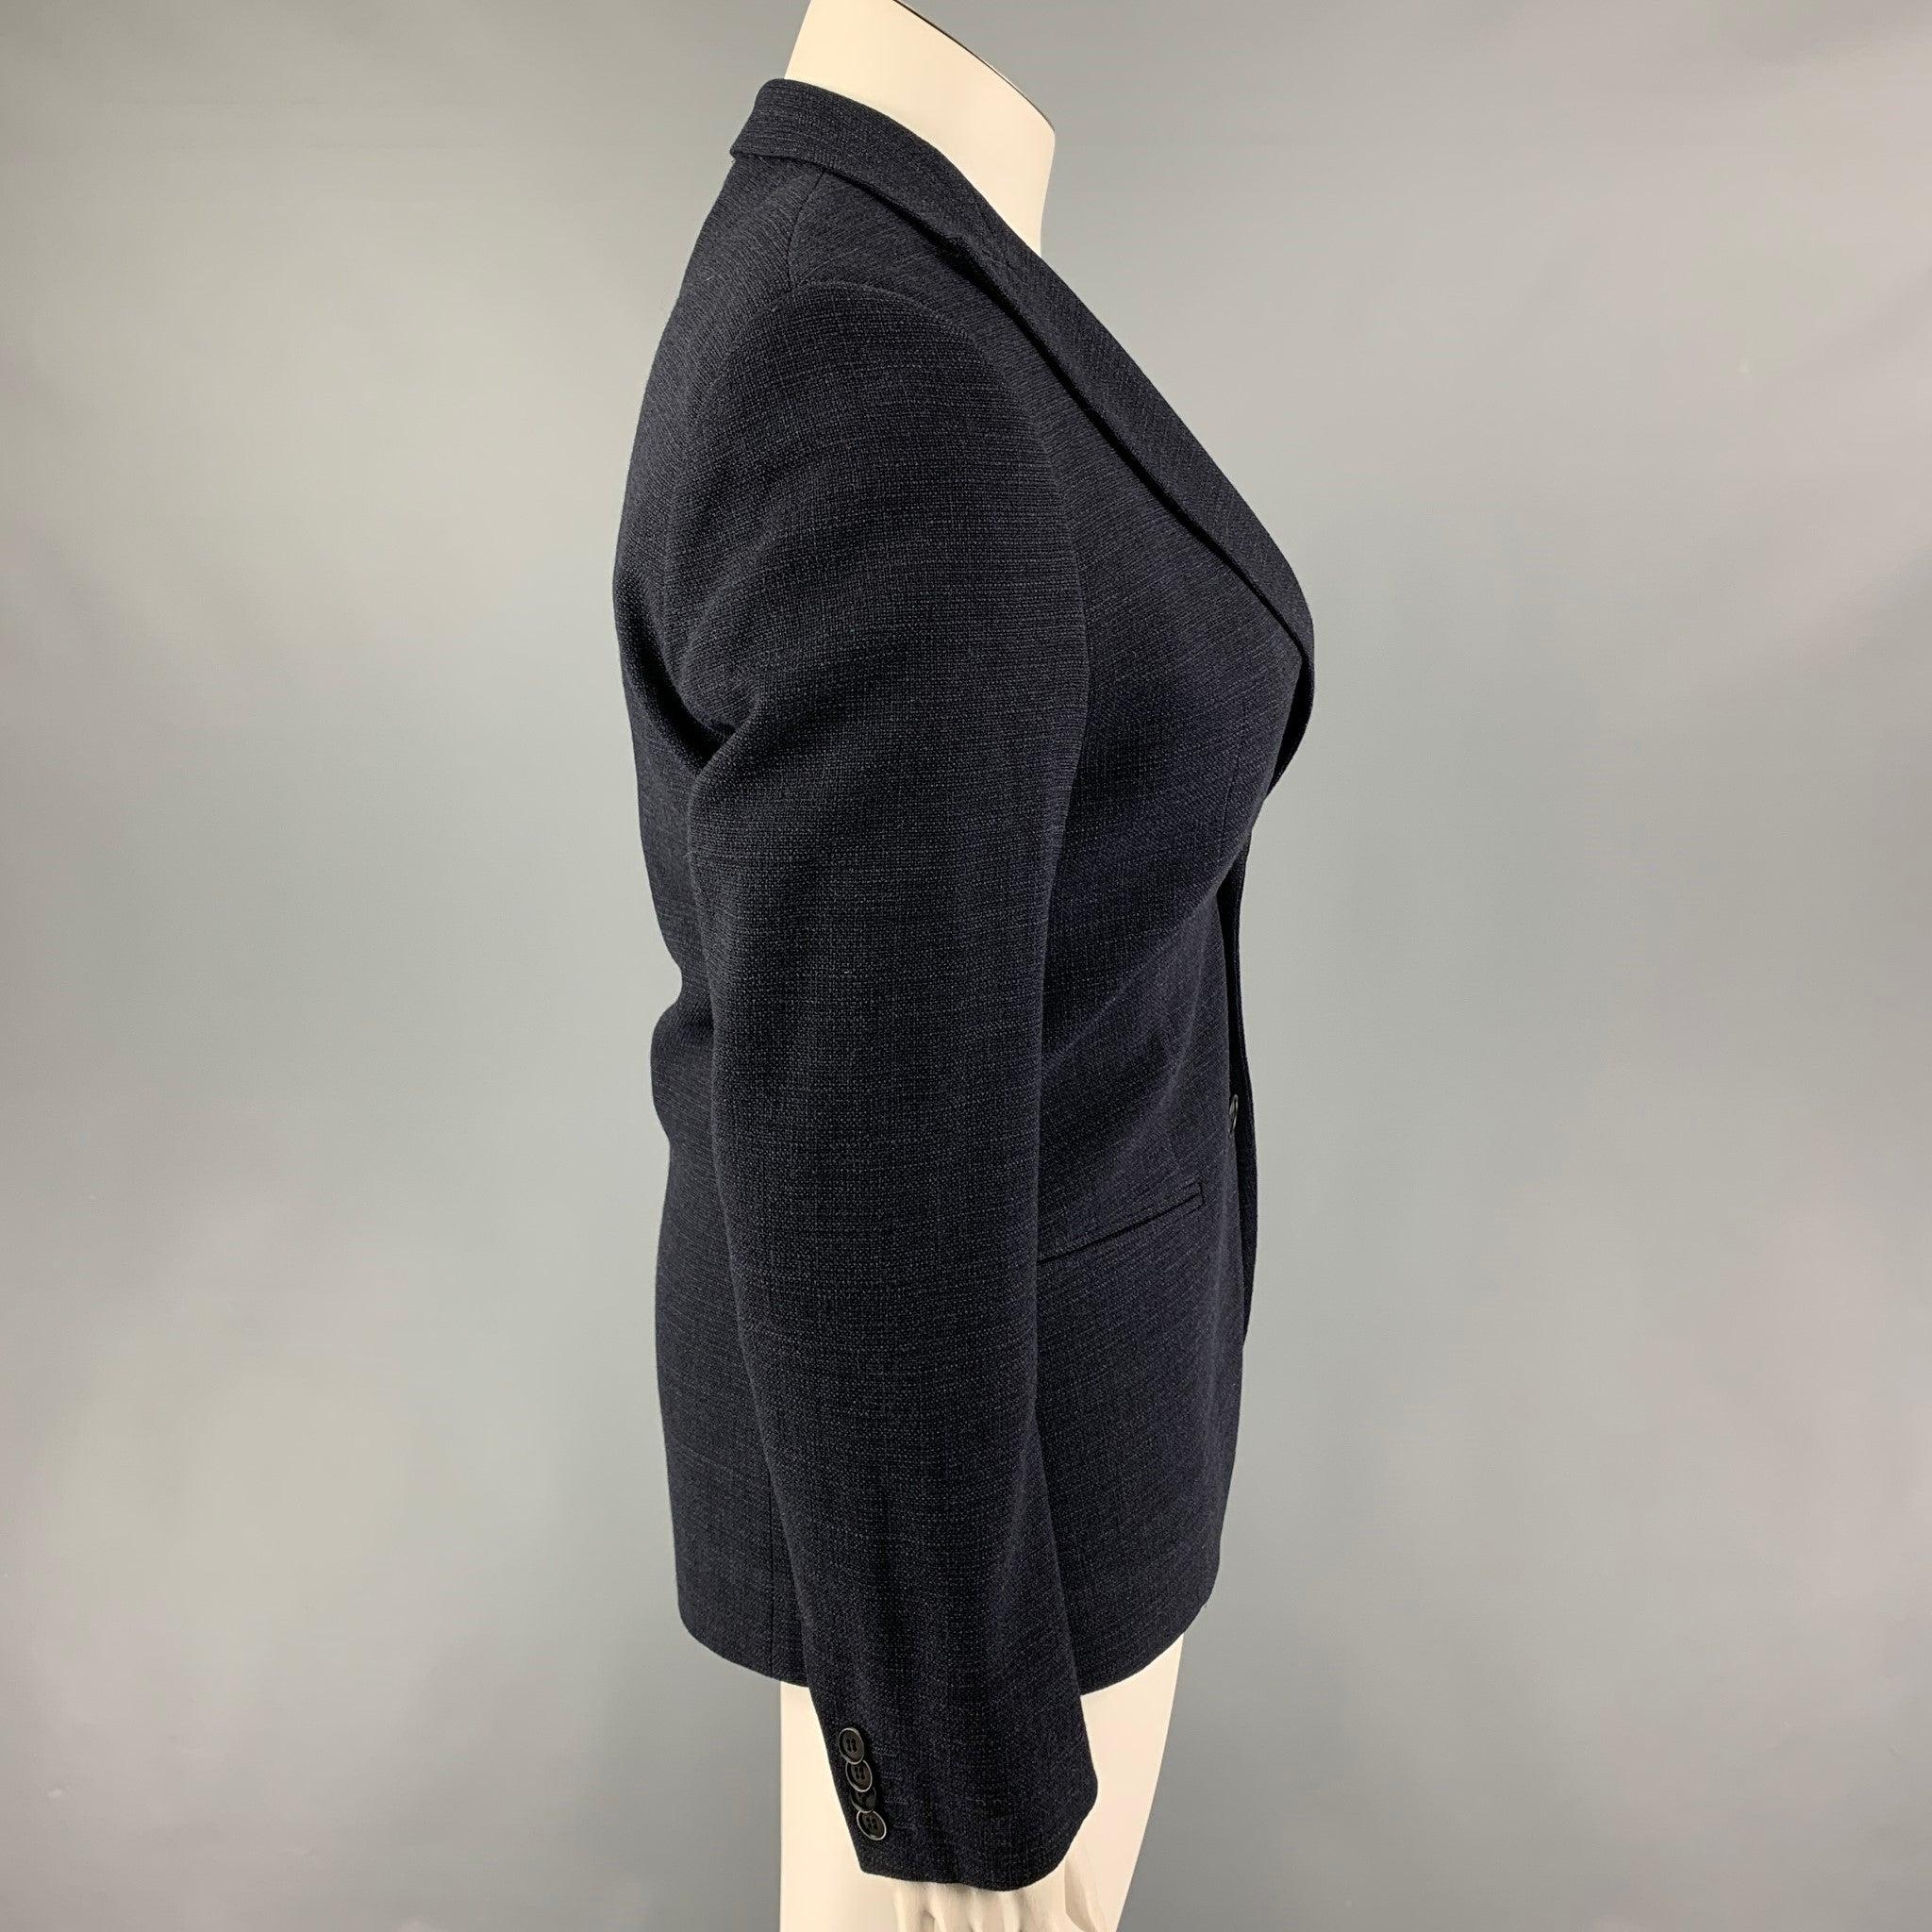 GIORGIO ARMANI blazer comes in a navy wool with a full liner featuring a peak lapel, slit pockets, and a double button closure.
Excellent
Pre-Owned Condition. 

Marked:   46 

Measurements: 
 
Shoulder: 17 inches Bust: 36 inches Sleeve: 25.5 inches